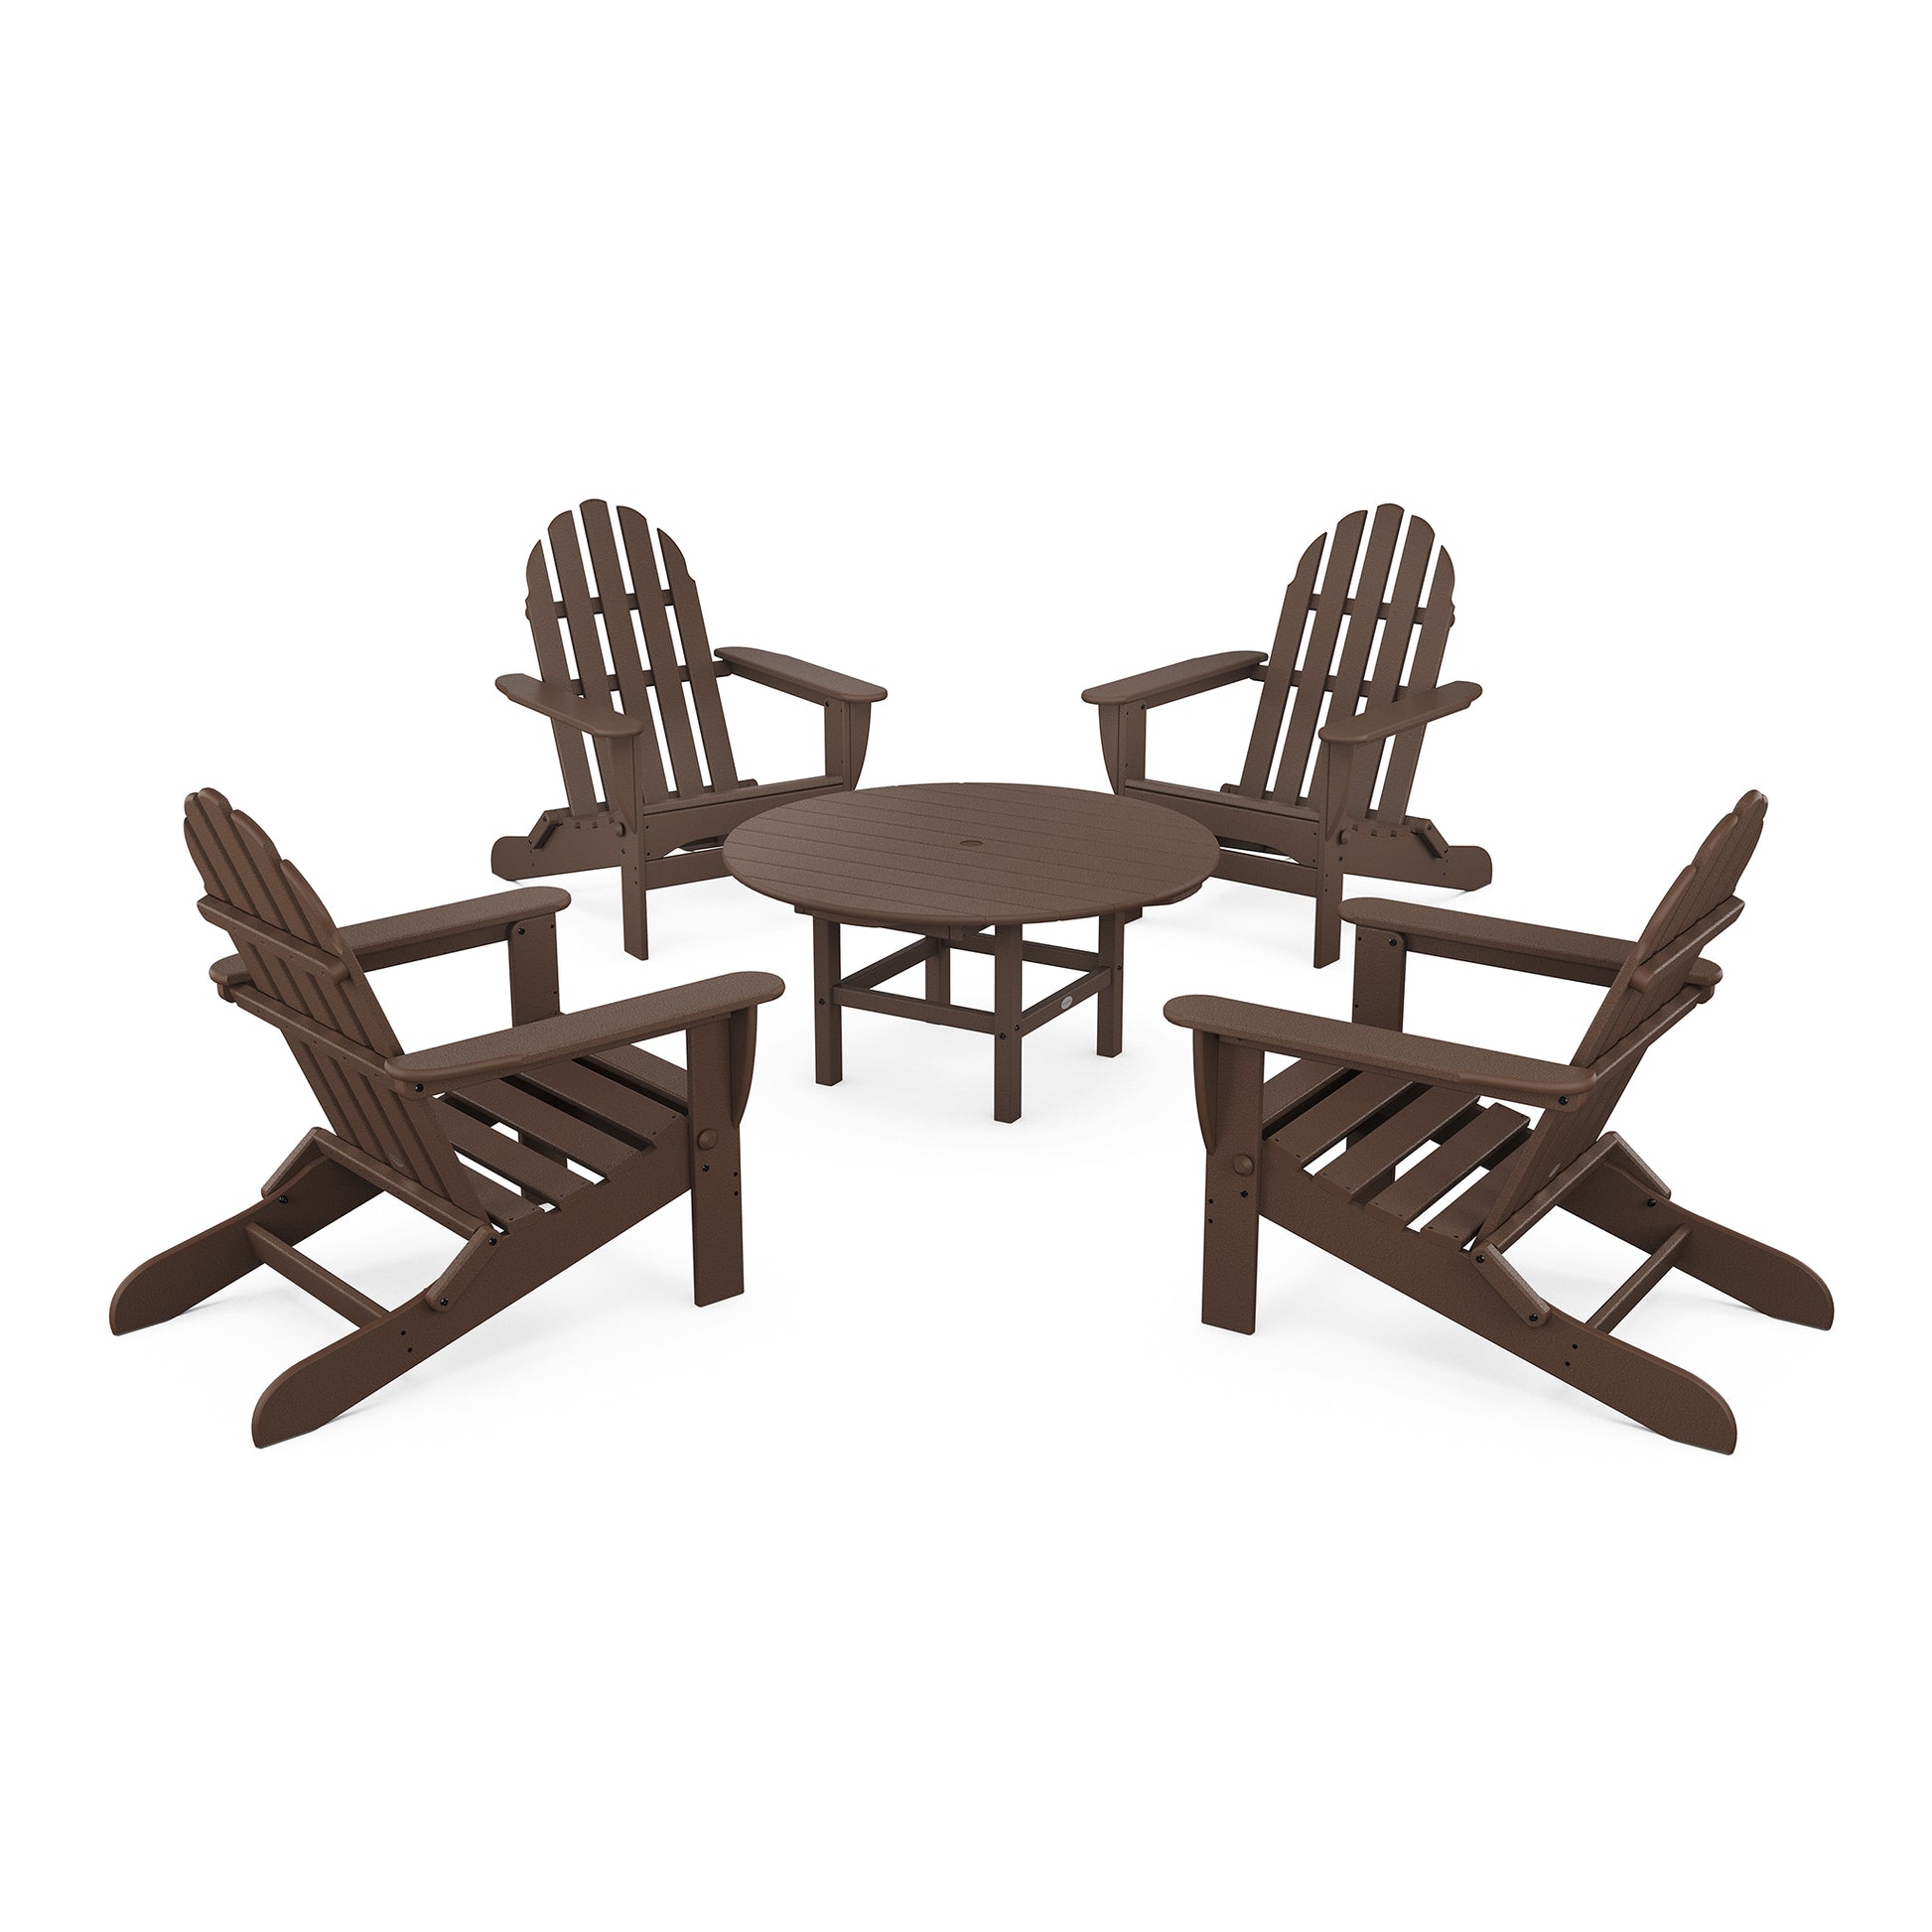 Four POLYWOOD Classic Folding Adirondack chairs arranged around a small, round table on a plain white background. The furniture, made of slatted wood, suggests a casual outdoor conversation set.